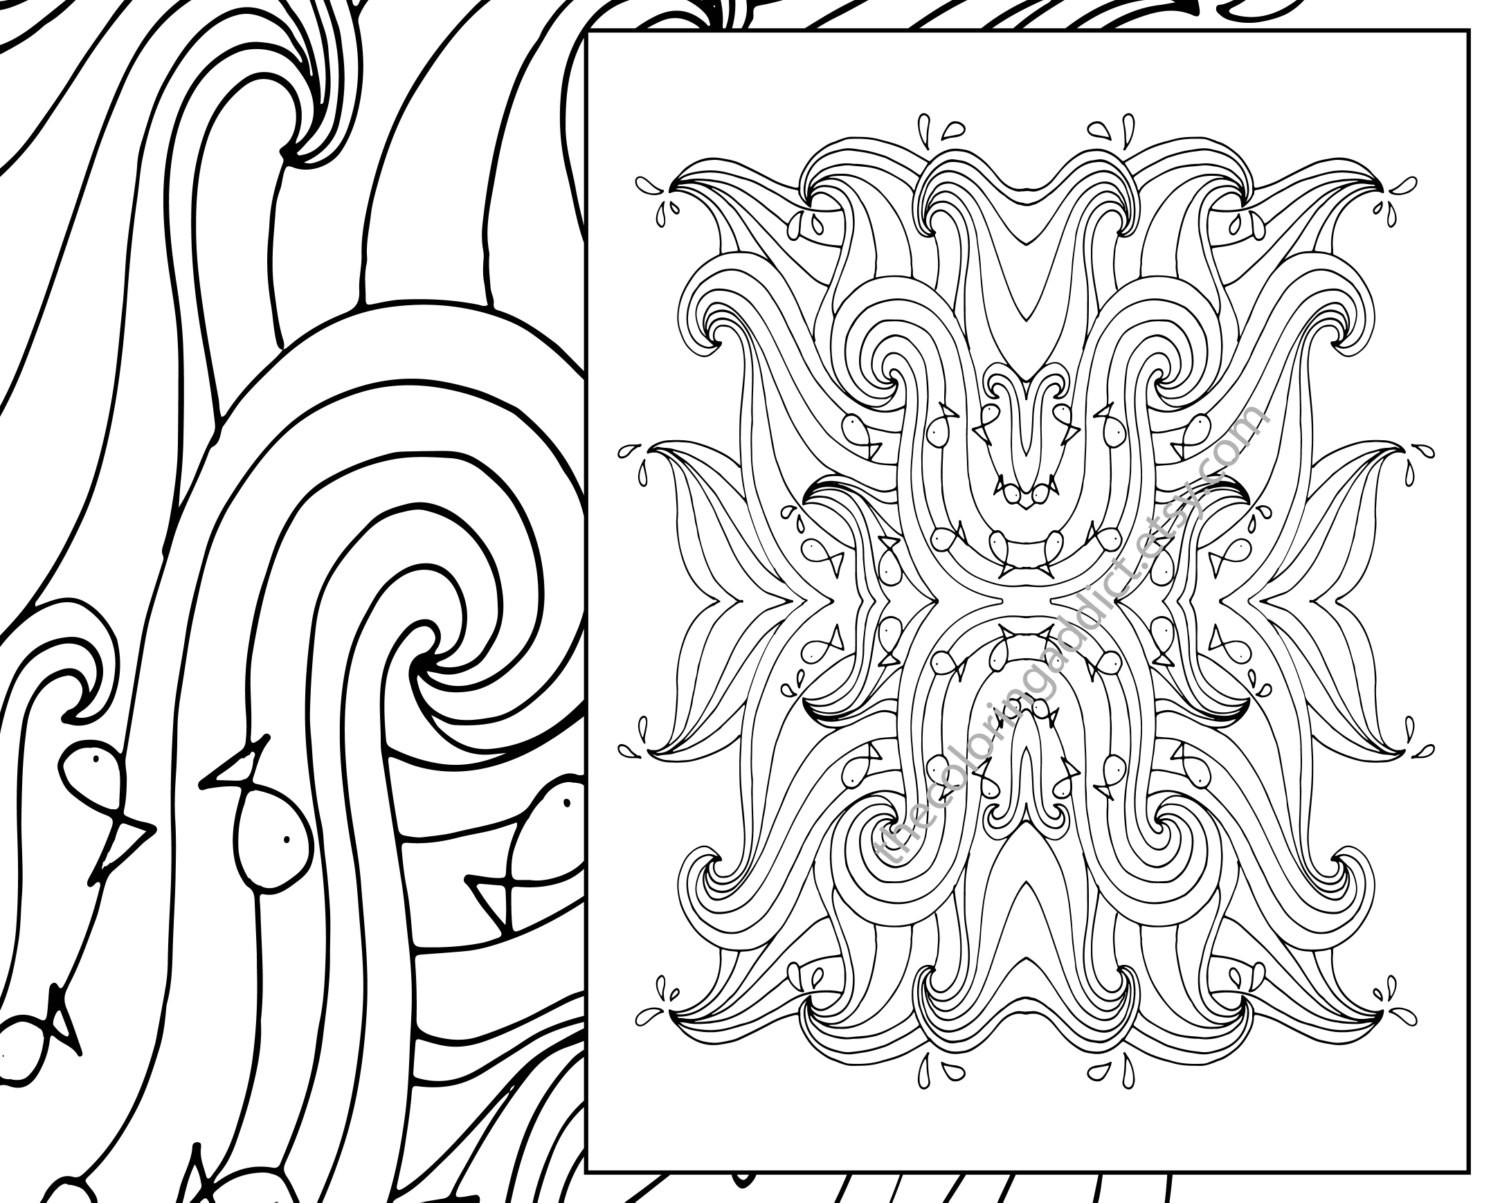 Ocean Waves Coloring Pages For Adults
 ocean wave adult coloring page beach adult coloring sheet